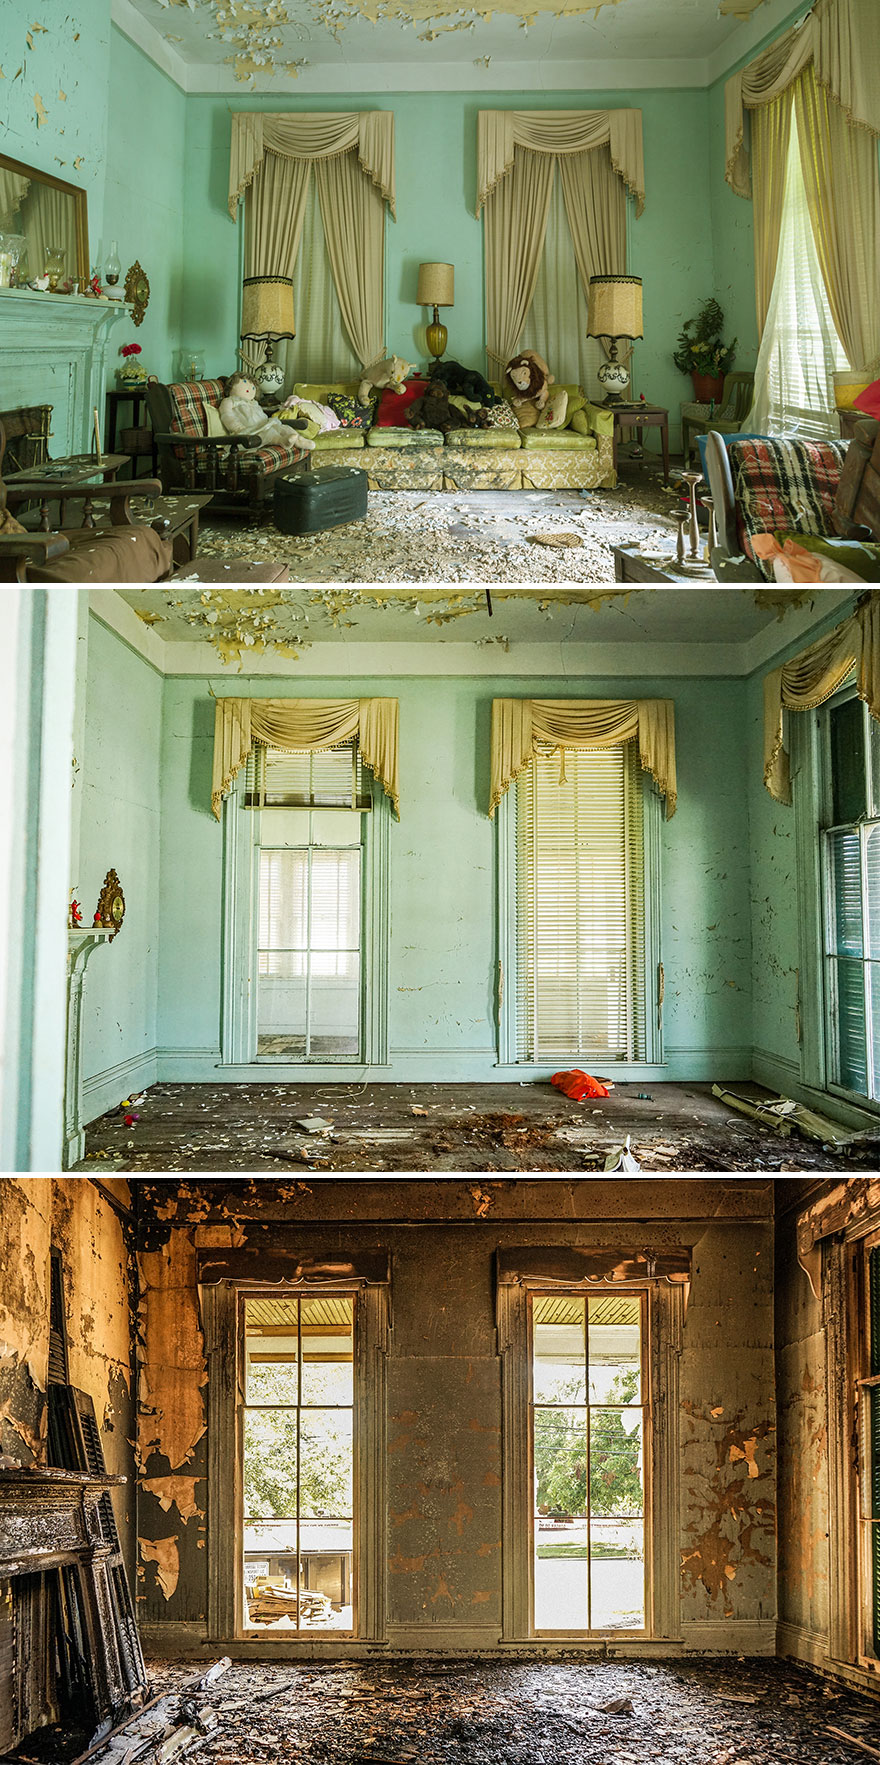 Our 13 Photos Of An Abandoned Georgian House That Was Renovated And Then Burnt By Lightning